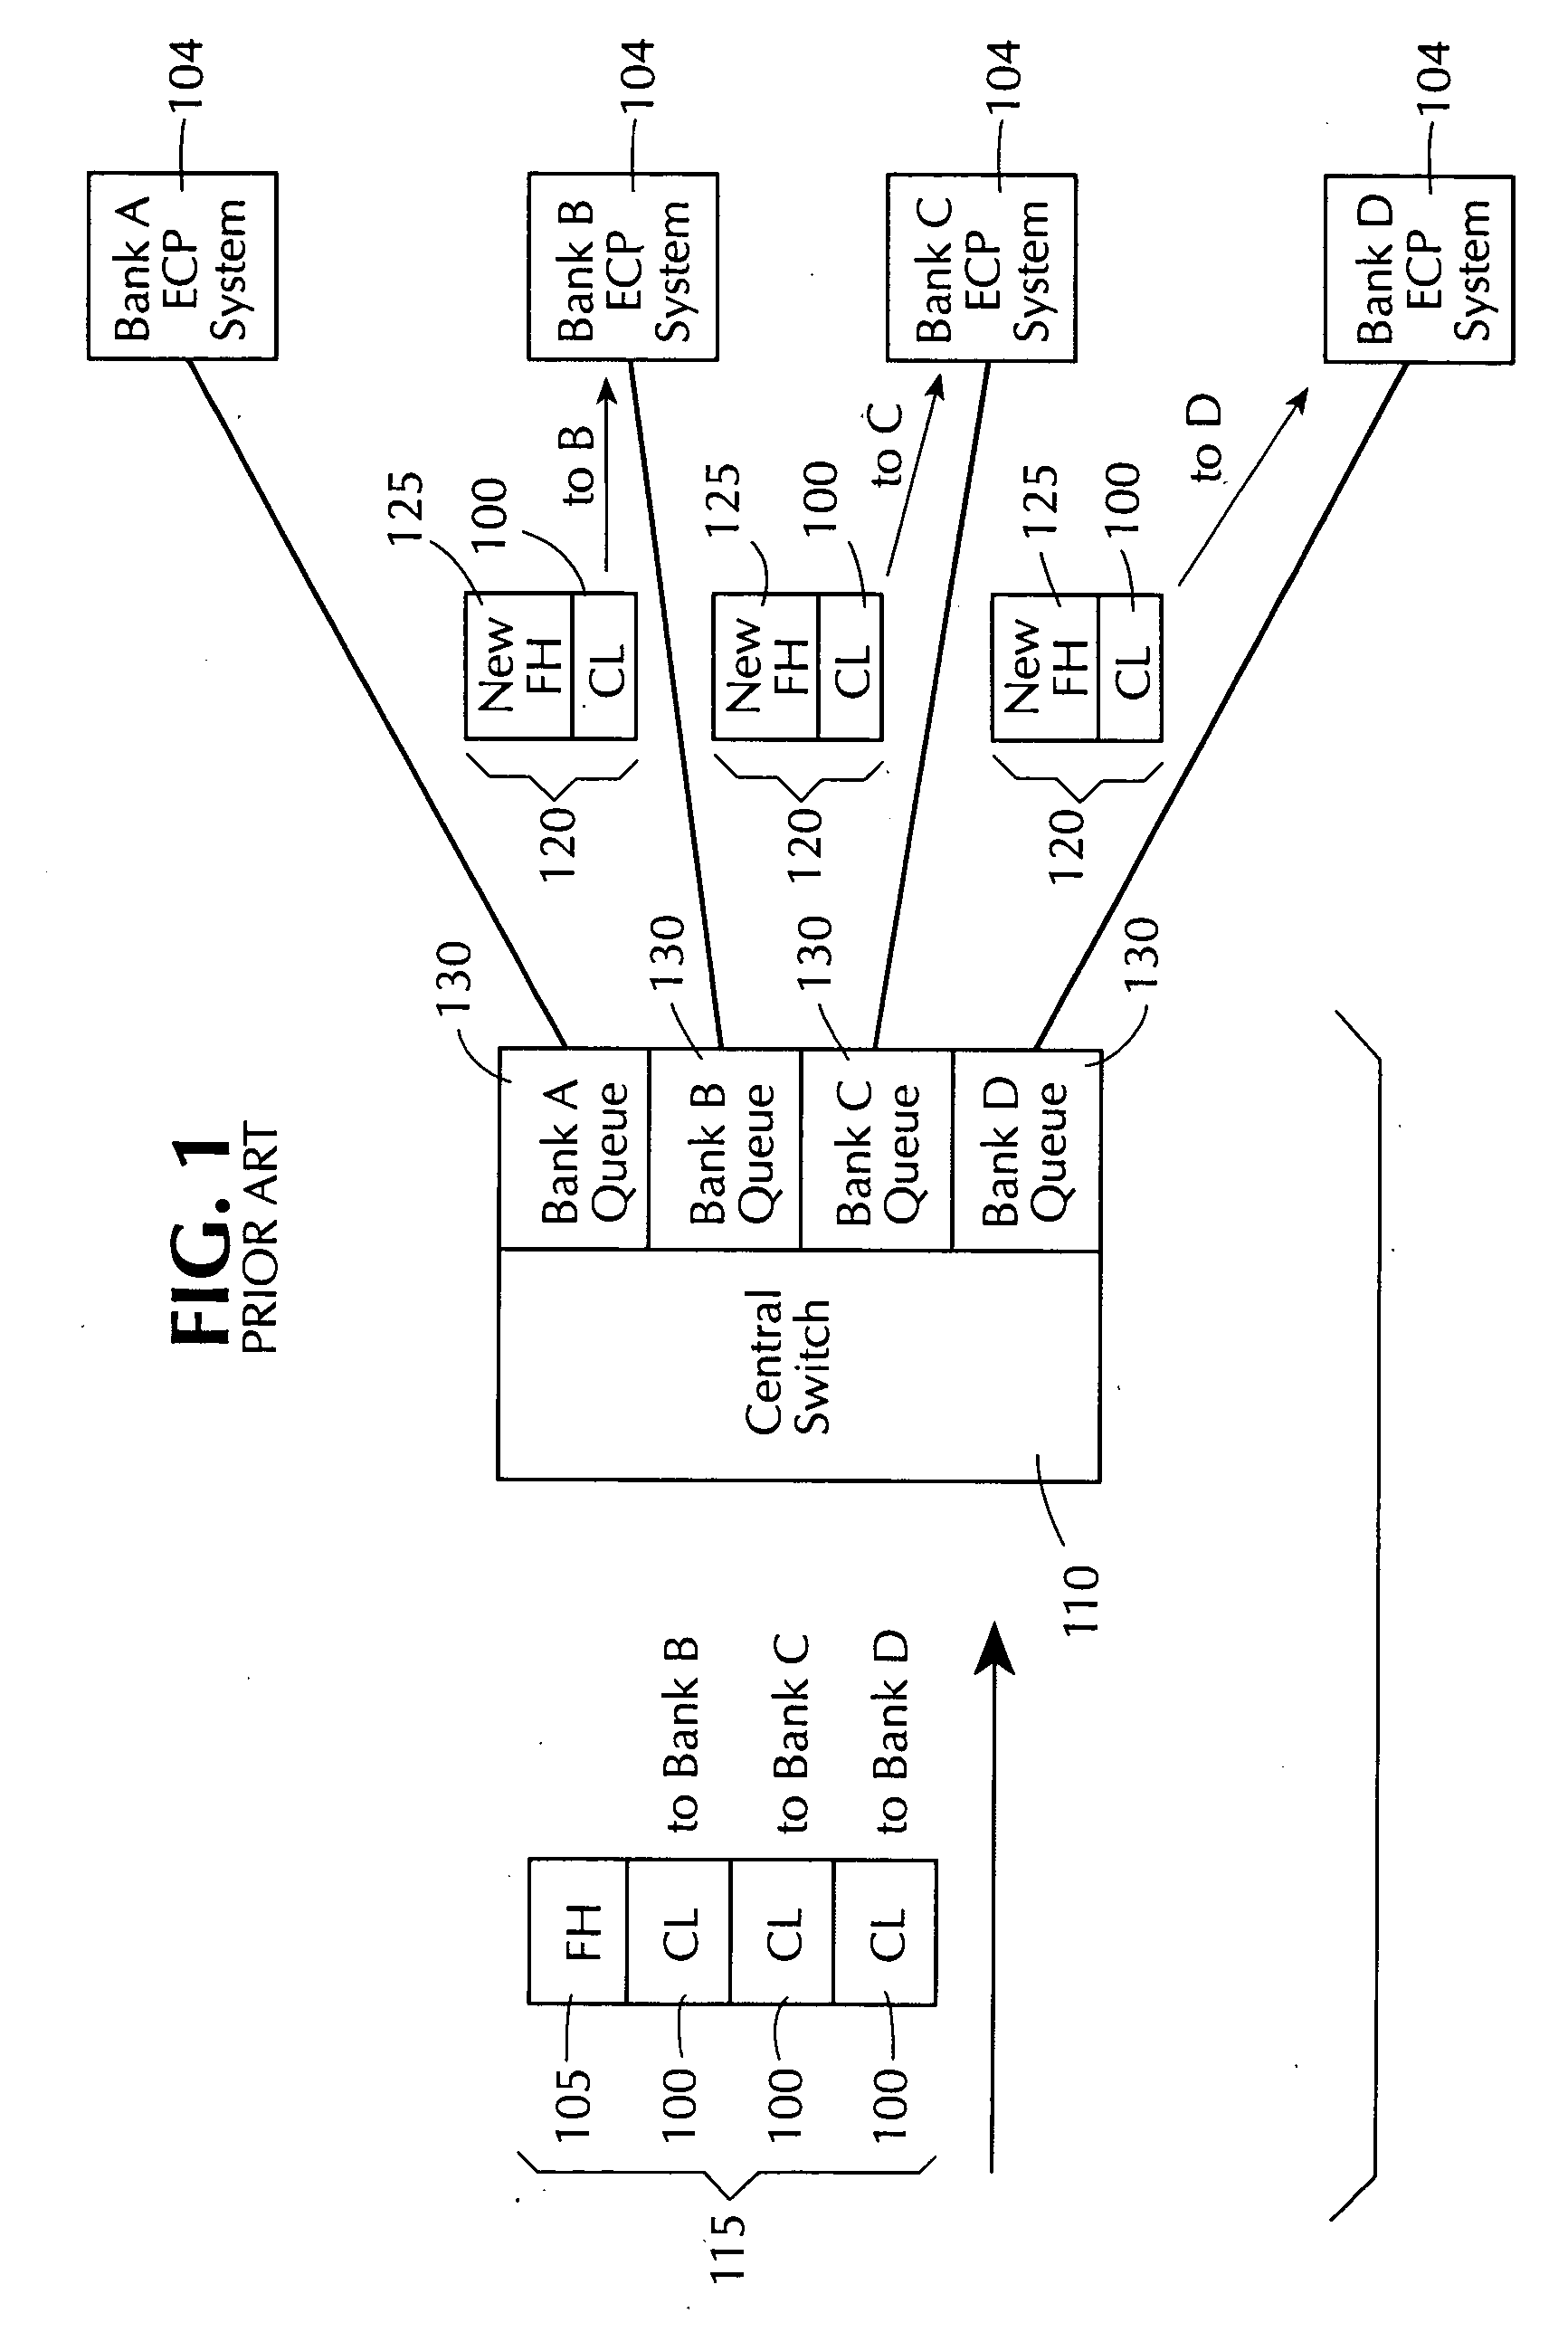 Electronic payment clearing and check image exchange systems and methods